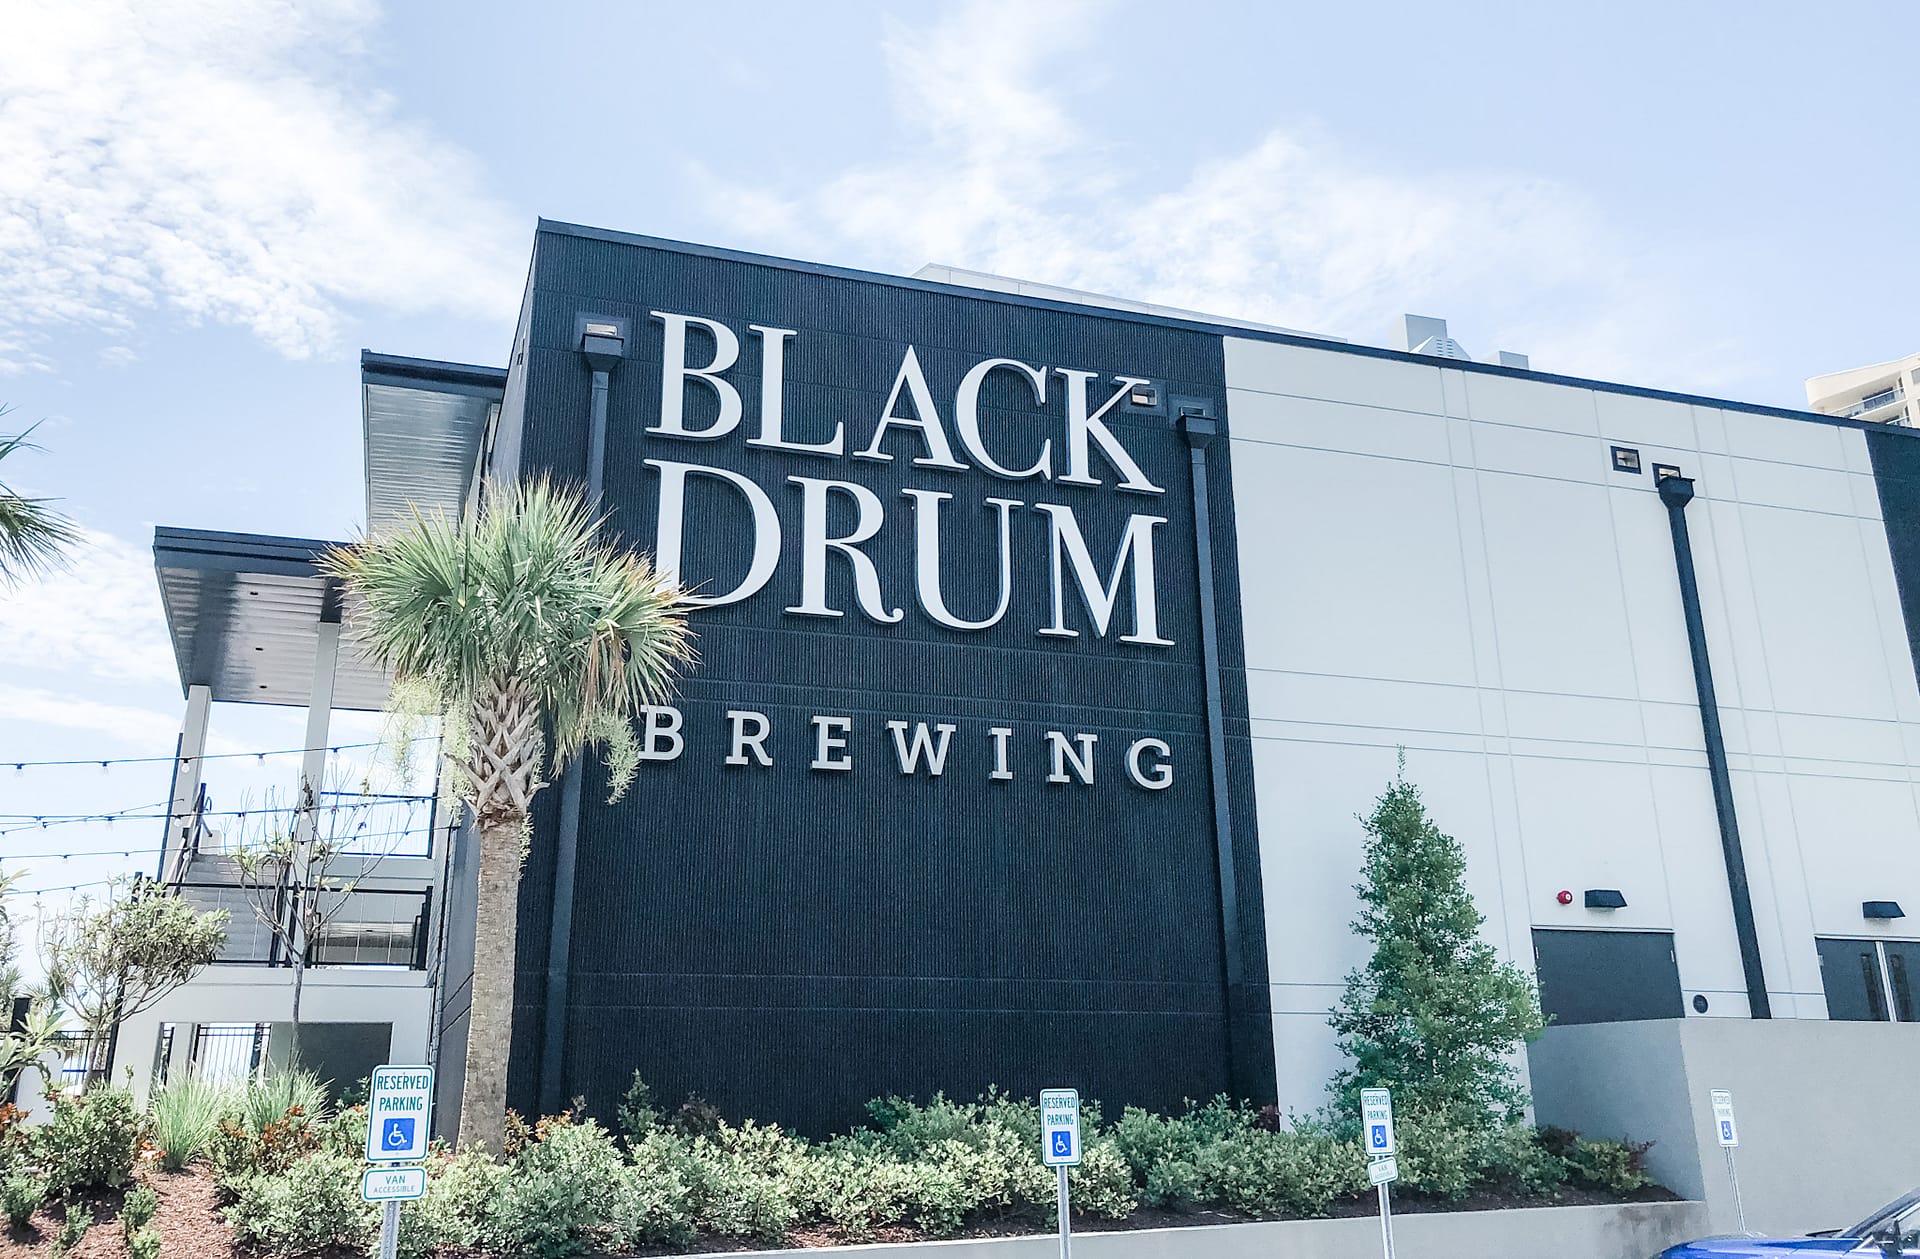 Black sign on building that reads Black Drum Brewing